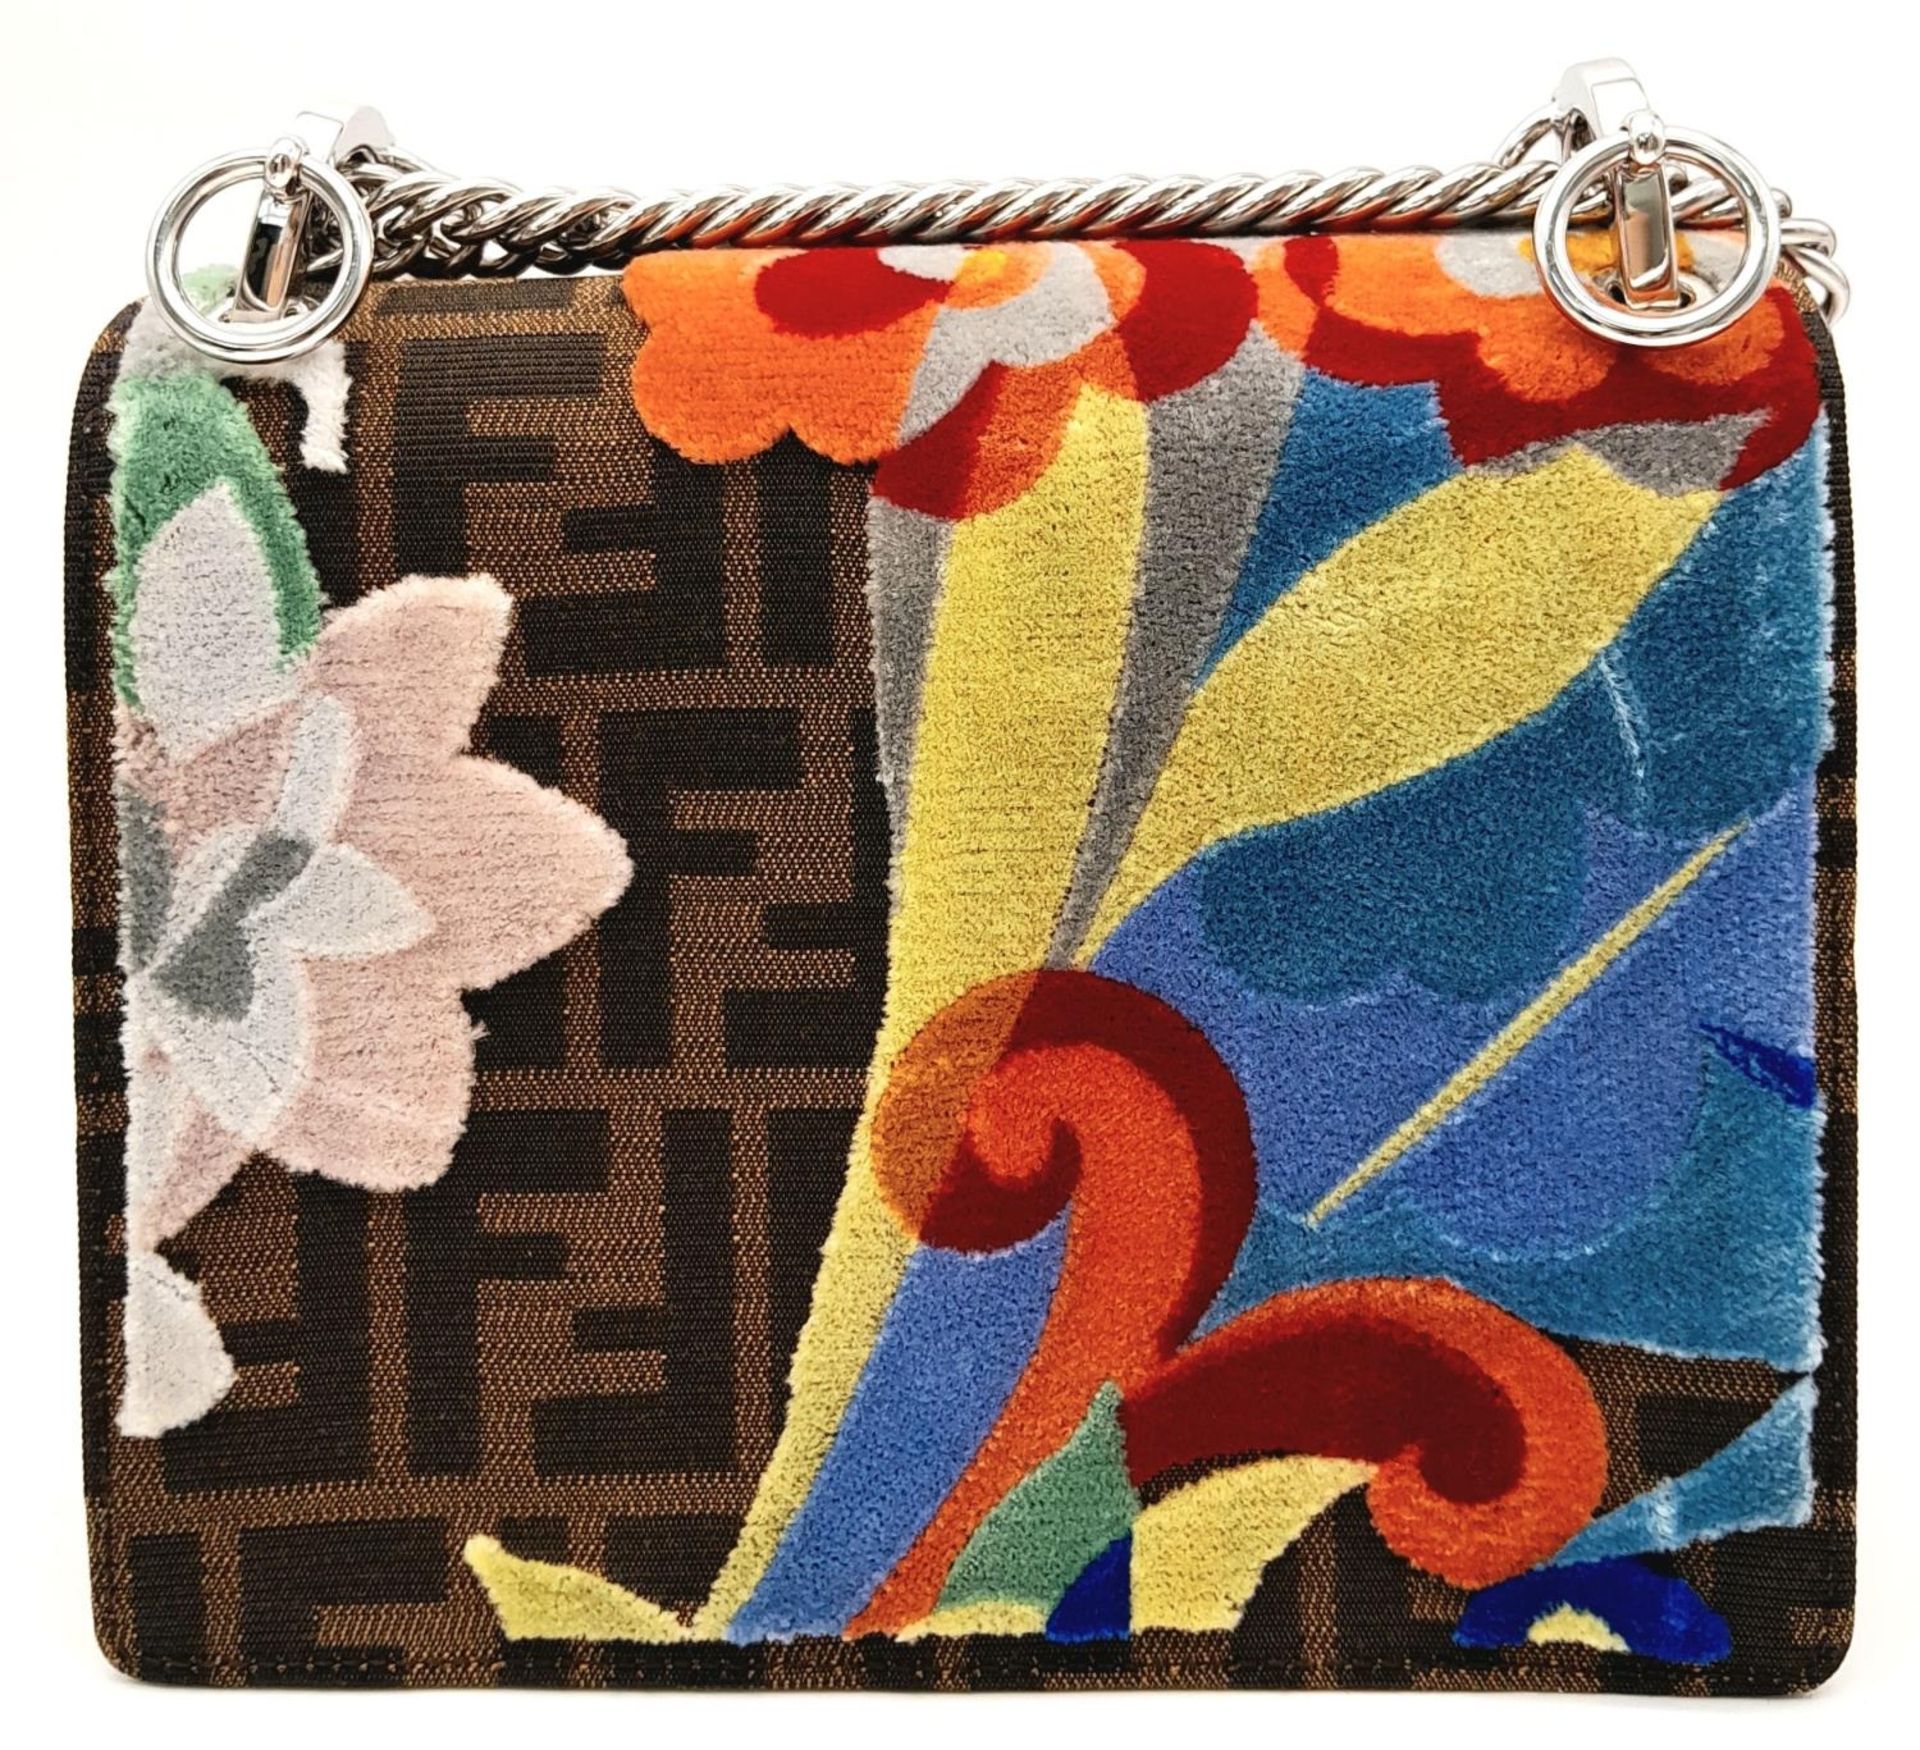 A Fendi Red Vitello Liberty Zucca Floral Kan I Crossbody Bag. Leather, canvas and carpet - Image 3 of 12